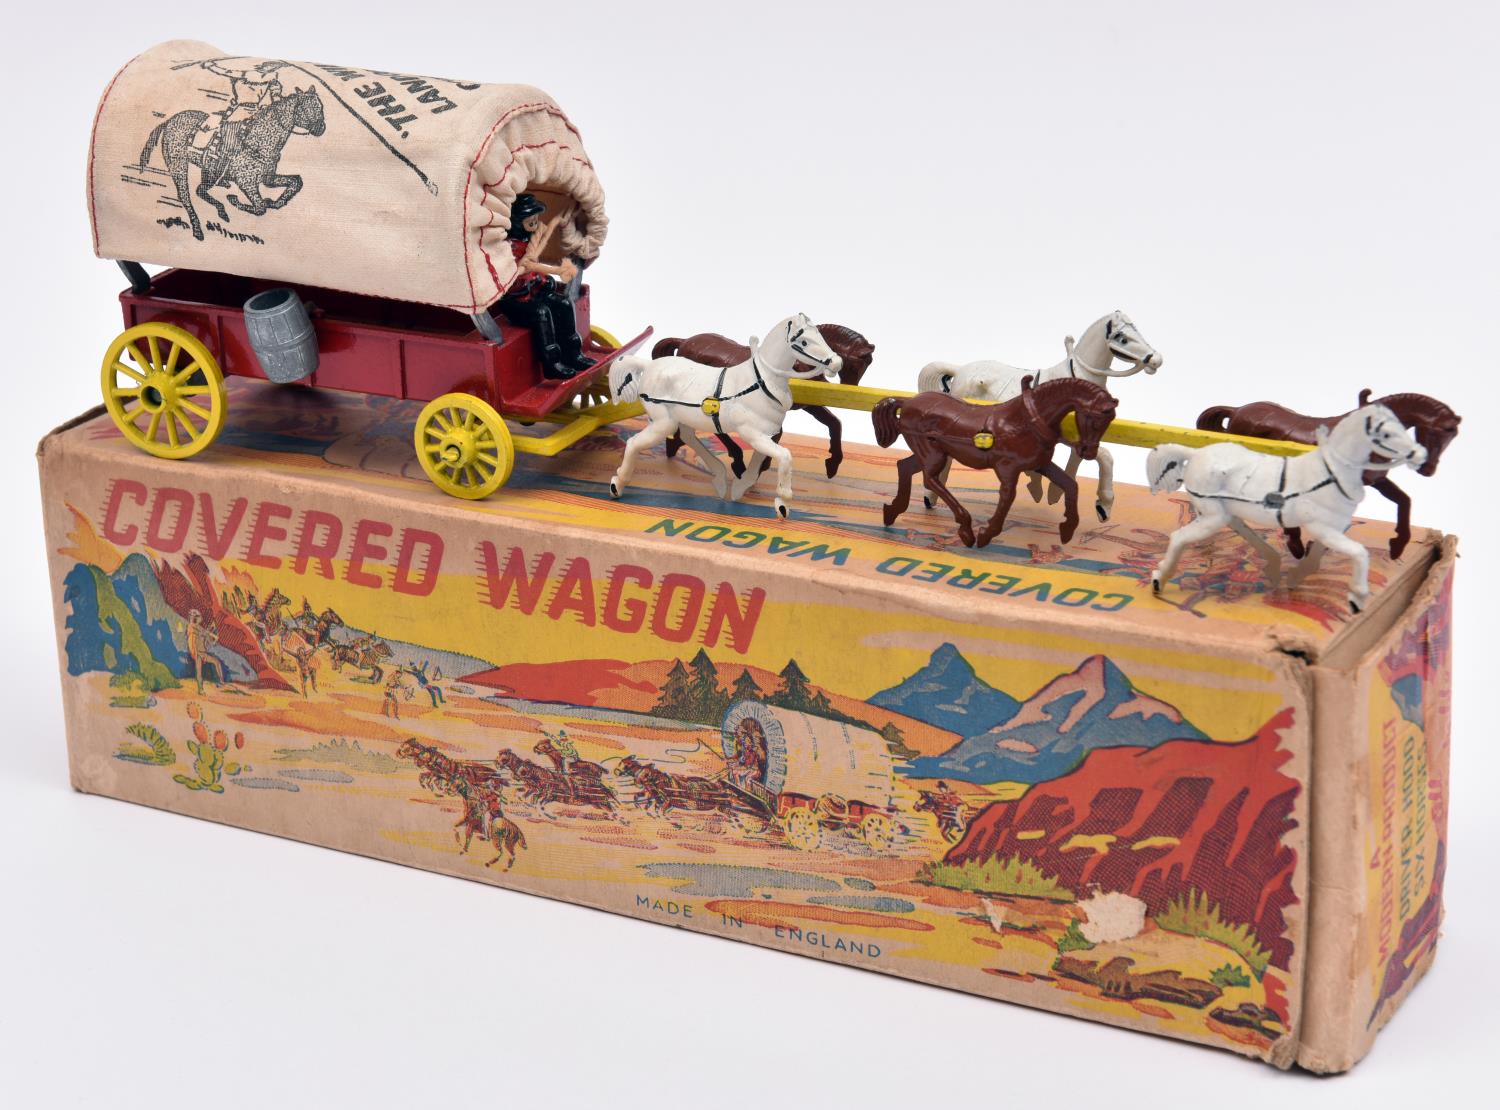 A Modern Products Covered Wagon. In red with yellow wheels, six horses, pictured tilt, red painted